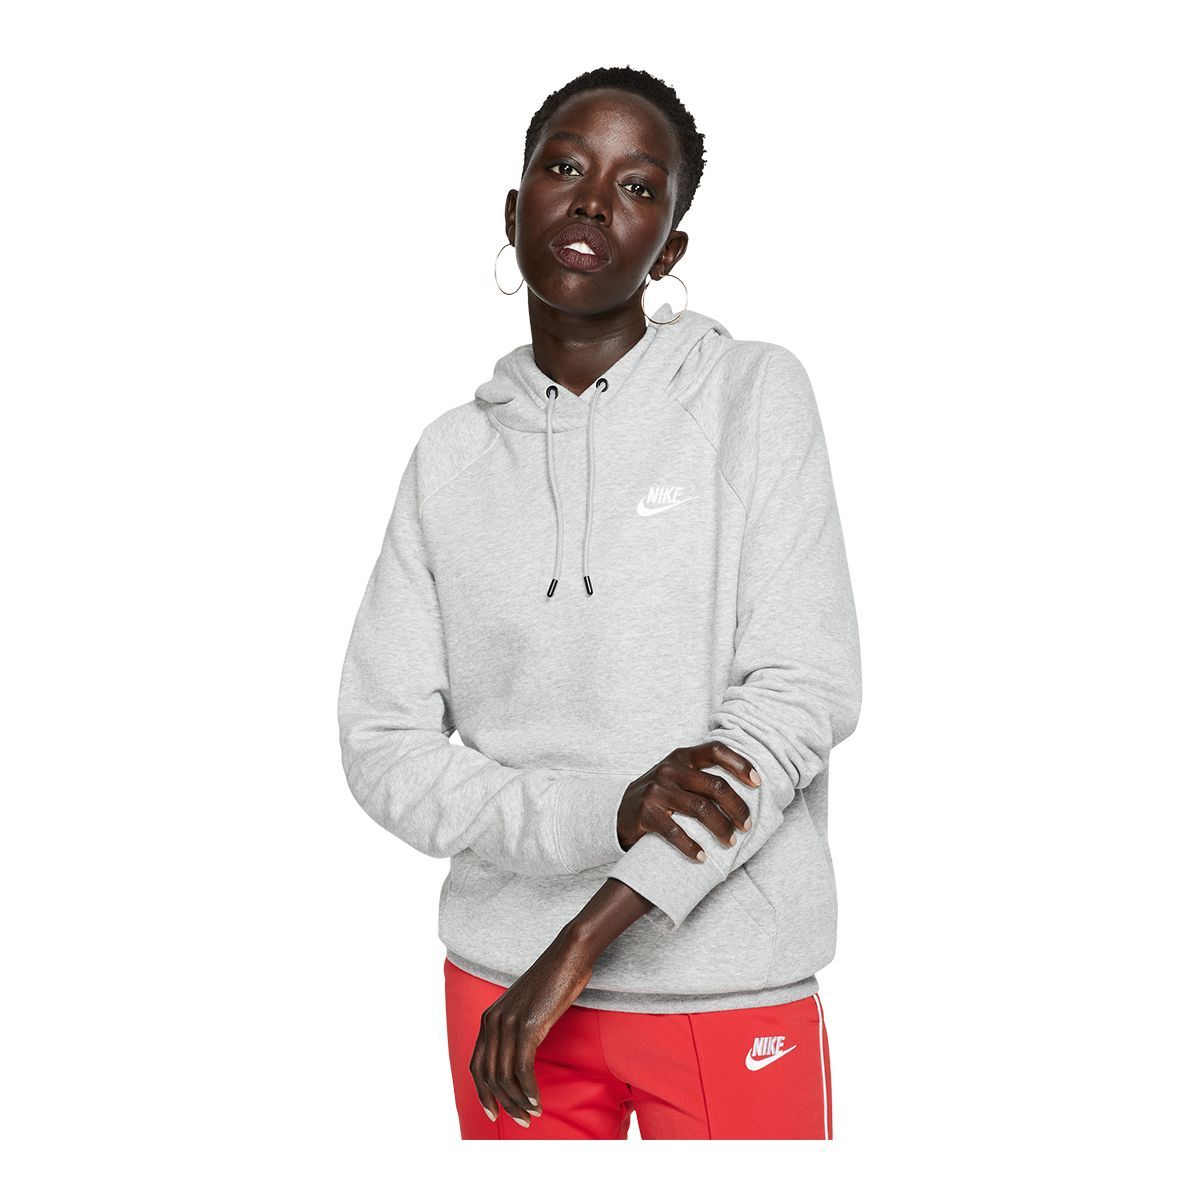 https://media-www.atmosphere.ca/product/div-03-softgoods/dpt-70-athletic-clothing/sdpt-02-womens/332929909/nike-w-sw-essential-po-hoody-dk-grey-heather-white-xs--cf1bb2b8-9e40-43f0-a60c-db6131d4c83d-jpgrendition.jpg